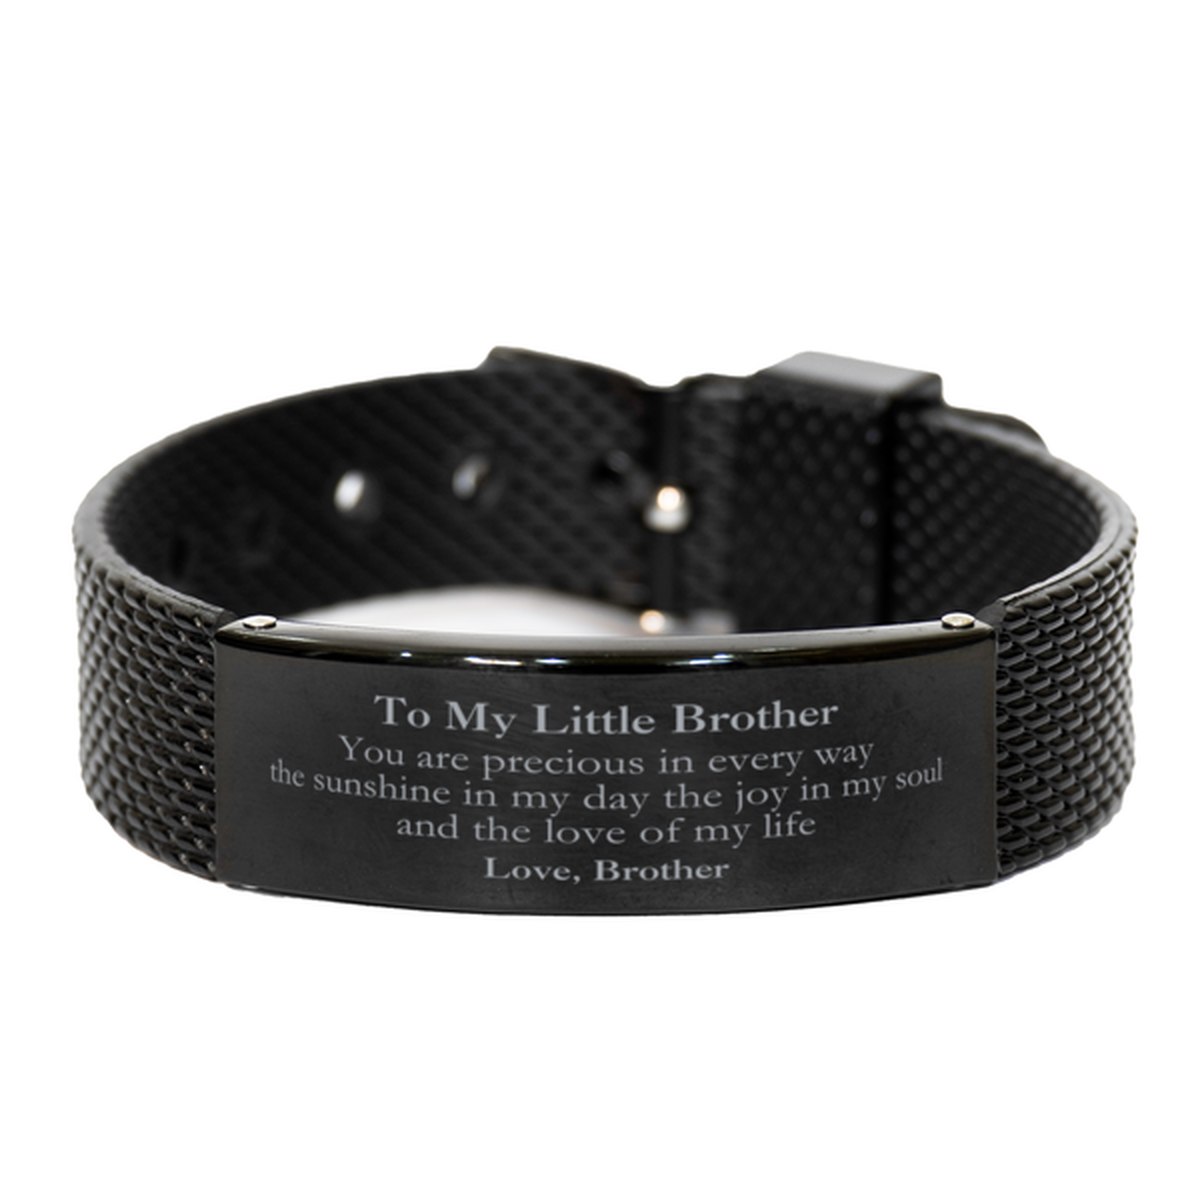 Graduation Gifts for Little Brother Black Shark Mesh Bracelet Present from Brother, Christmas Little Brother Birthday Gifts Little Brother You are precious in every way the sunshine in my day. Love, Brother